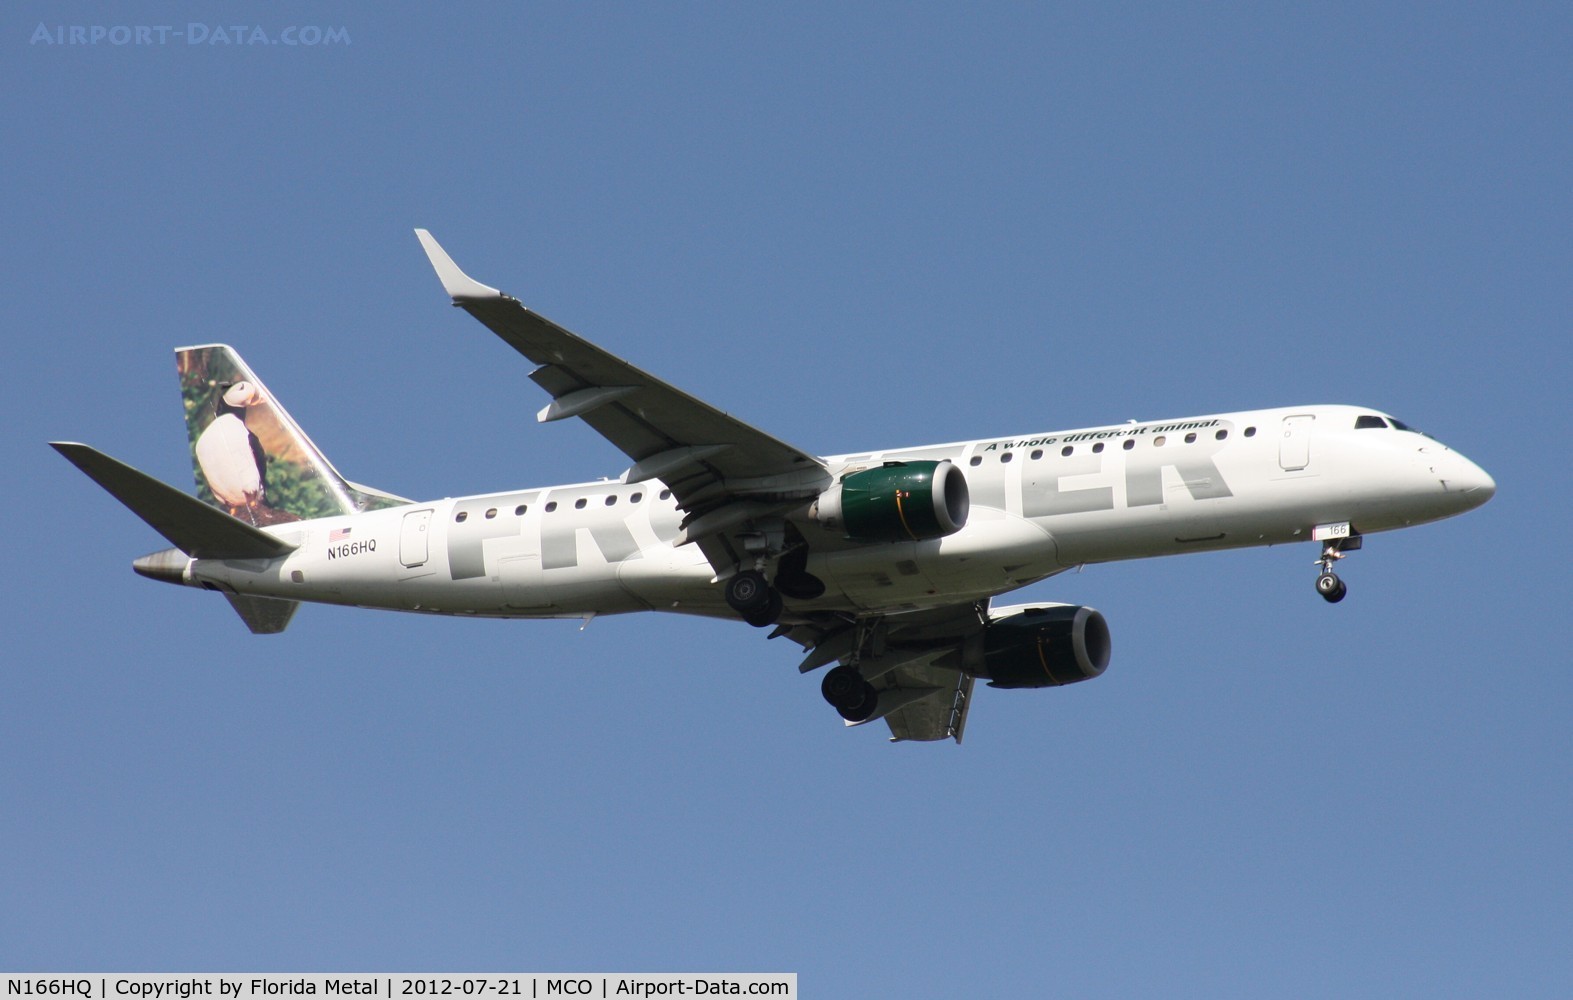 N166HQ, 2008 Embraer 190AR (ERJ-190-100IGW) C/N 19000166, Frontier Airlines Puffin tail E190